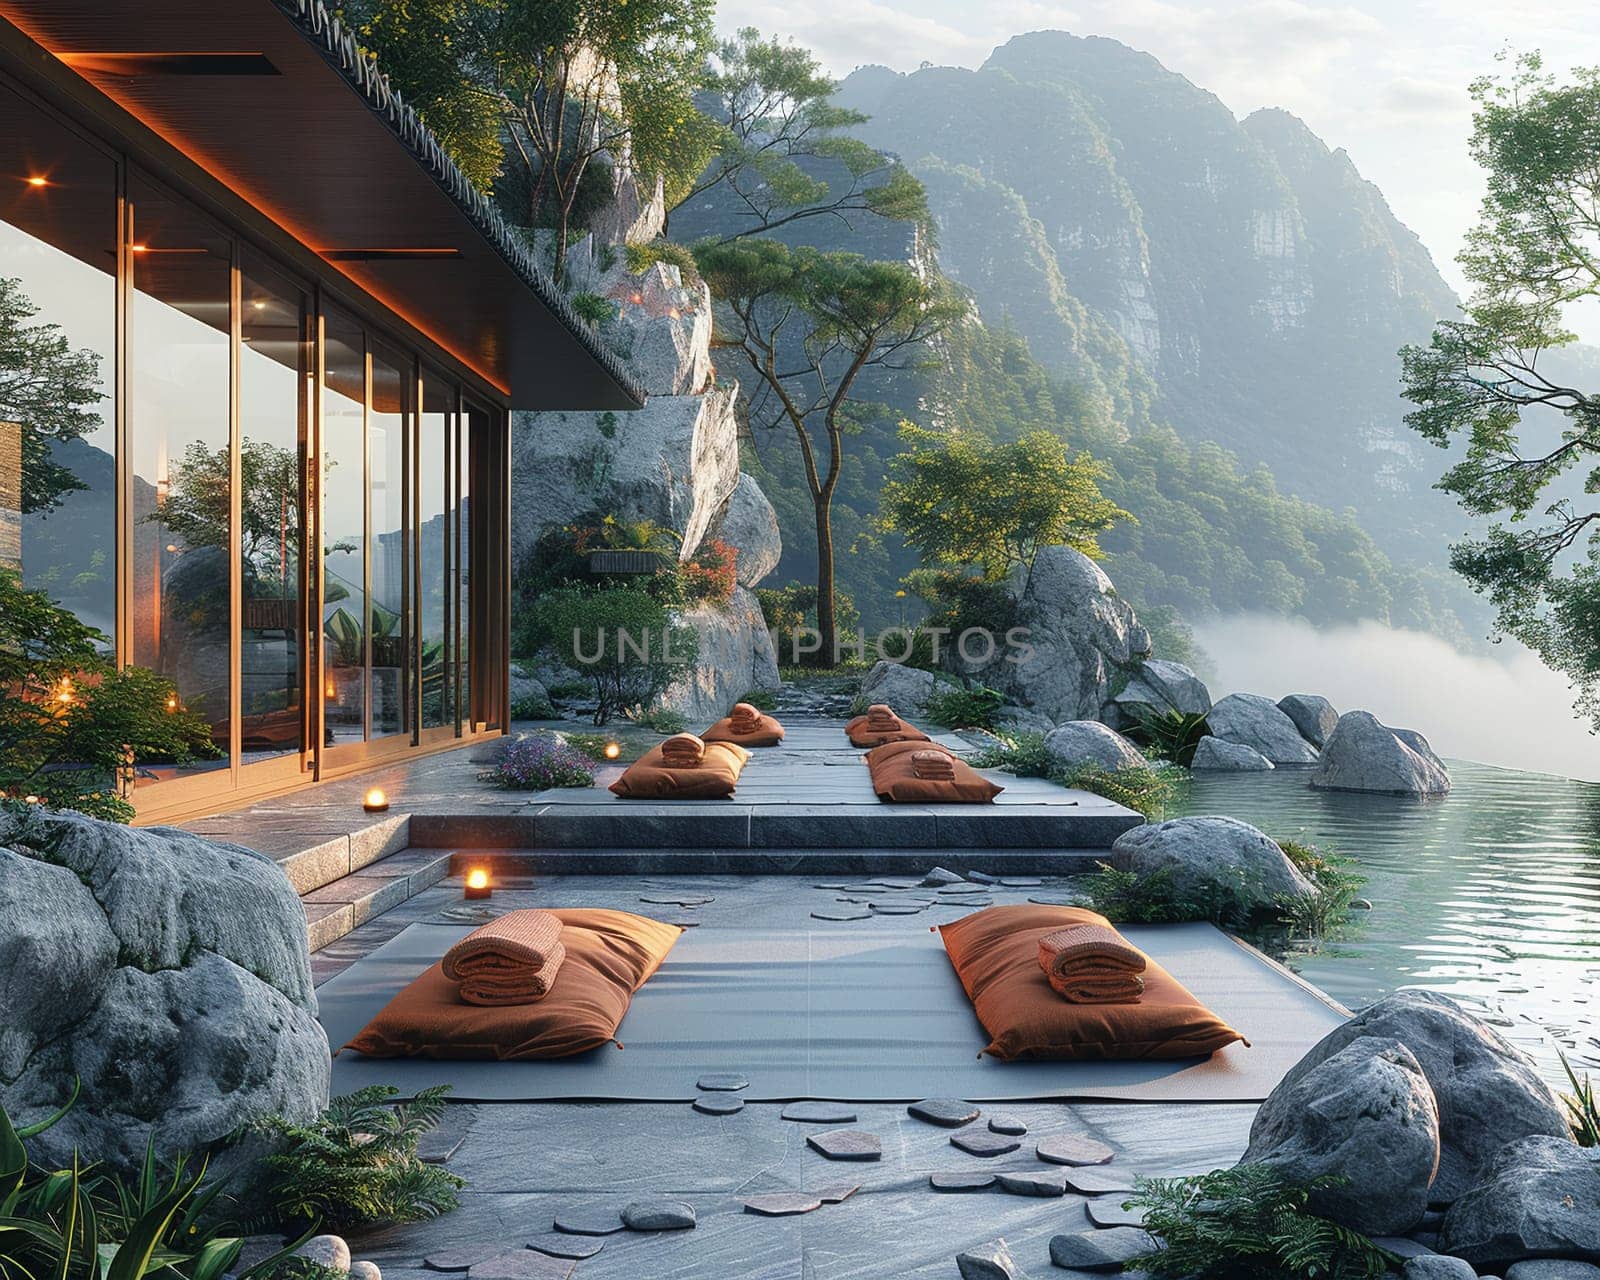 Peaceful Yoga Retreat in Nature with Soft Edges of Serenity, The gentle blend of nature and poses suggests the pursuit of wellness and mindfulness.